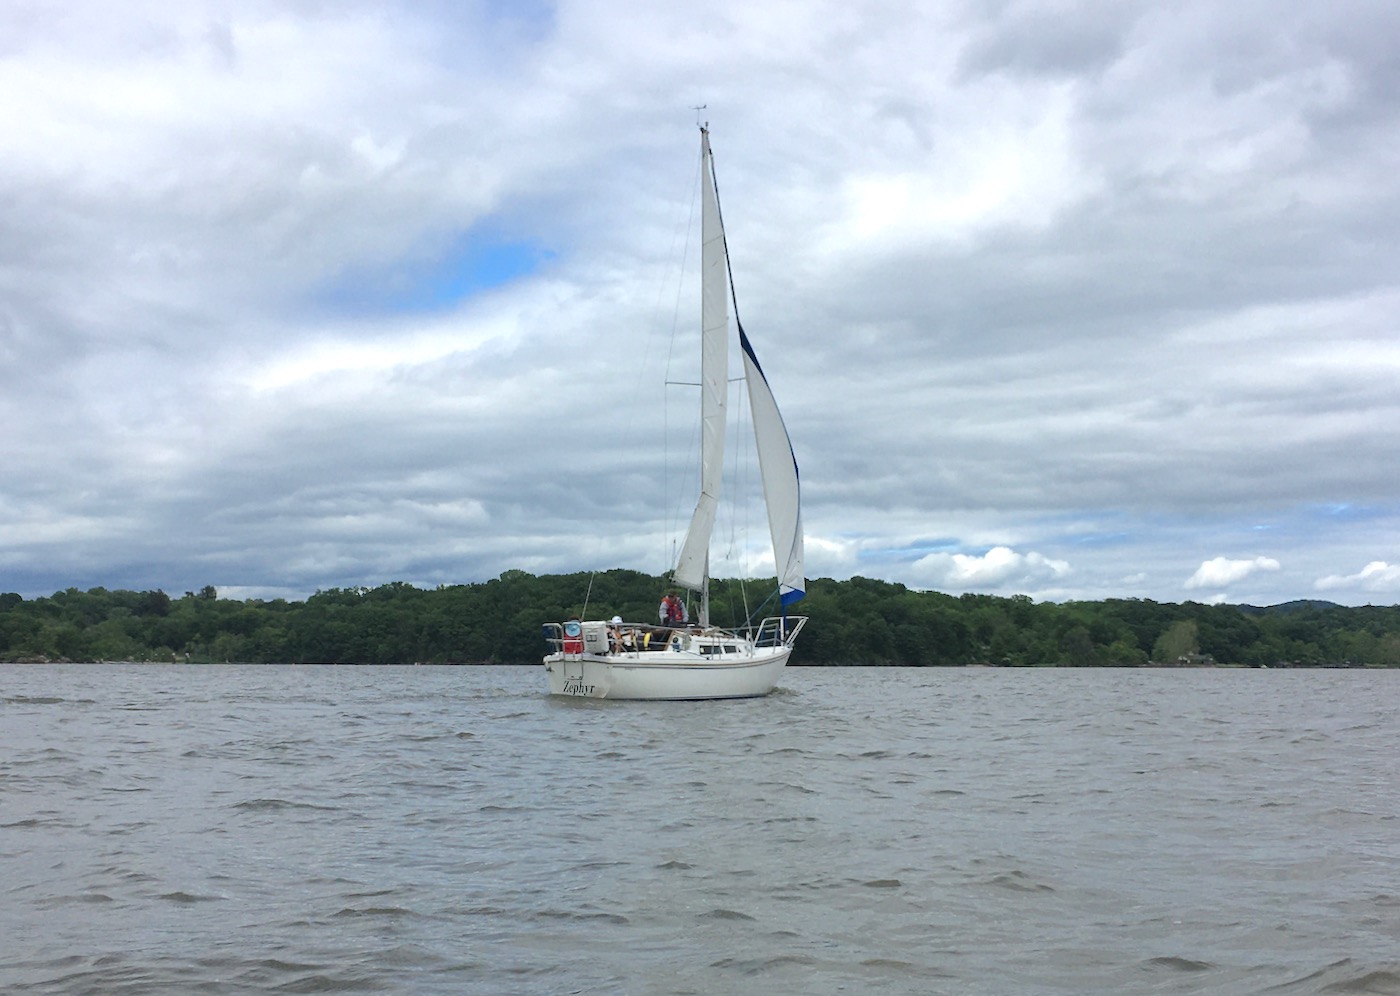 sailing in the Hudson River